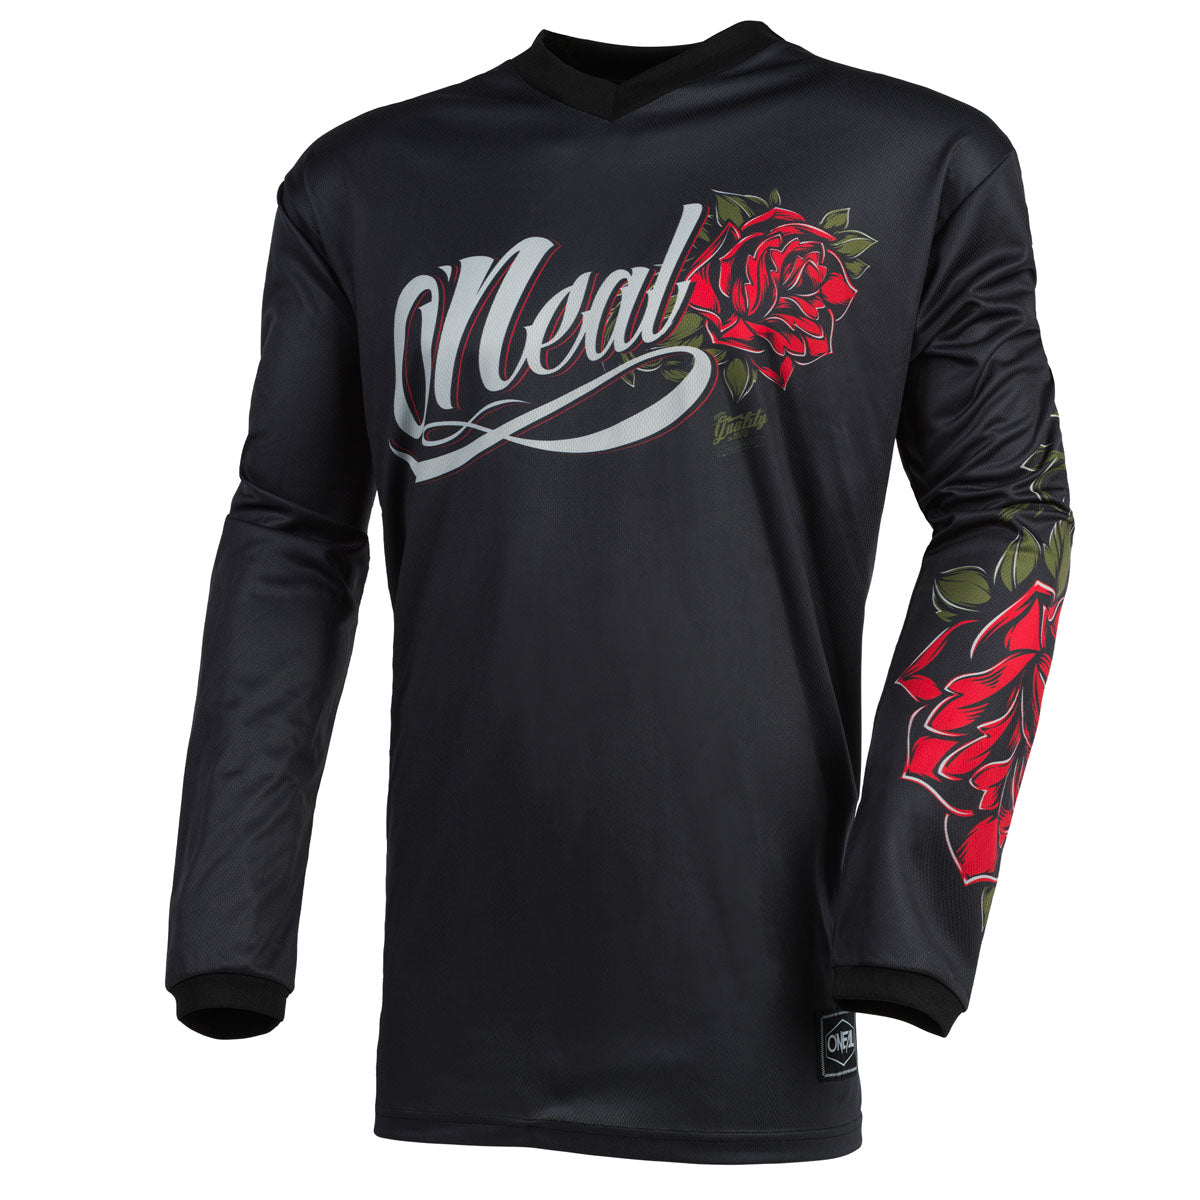 O'Neal Womens Element Threat Roses Jersey